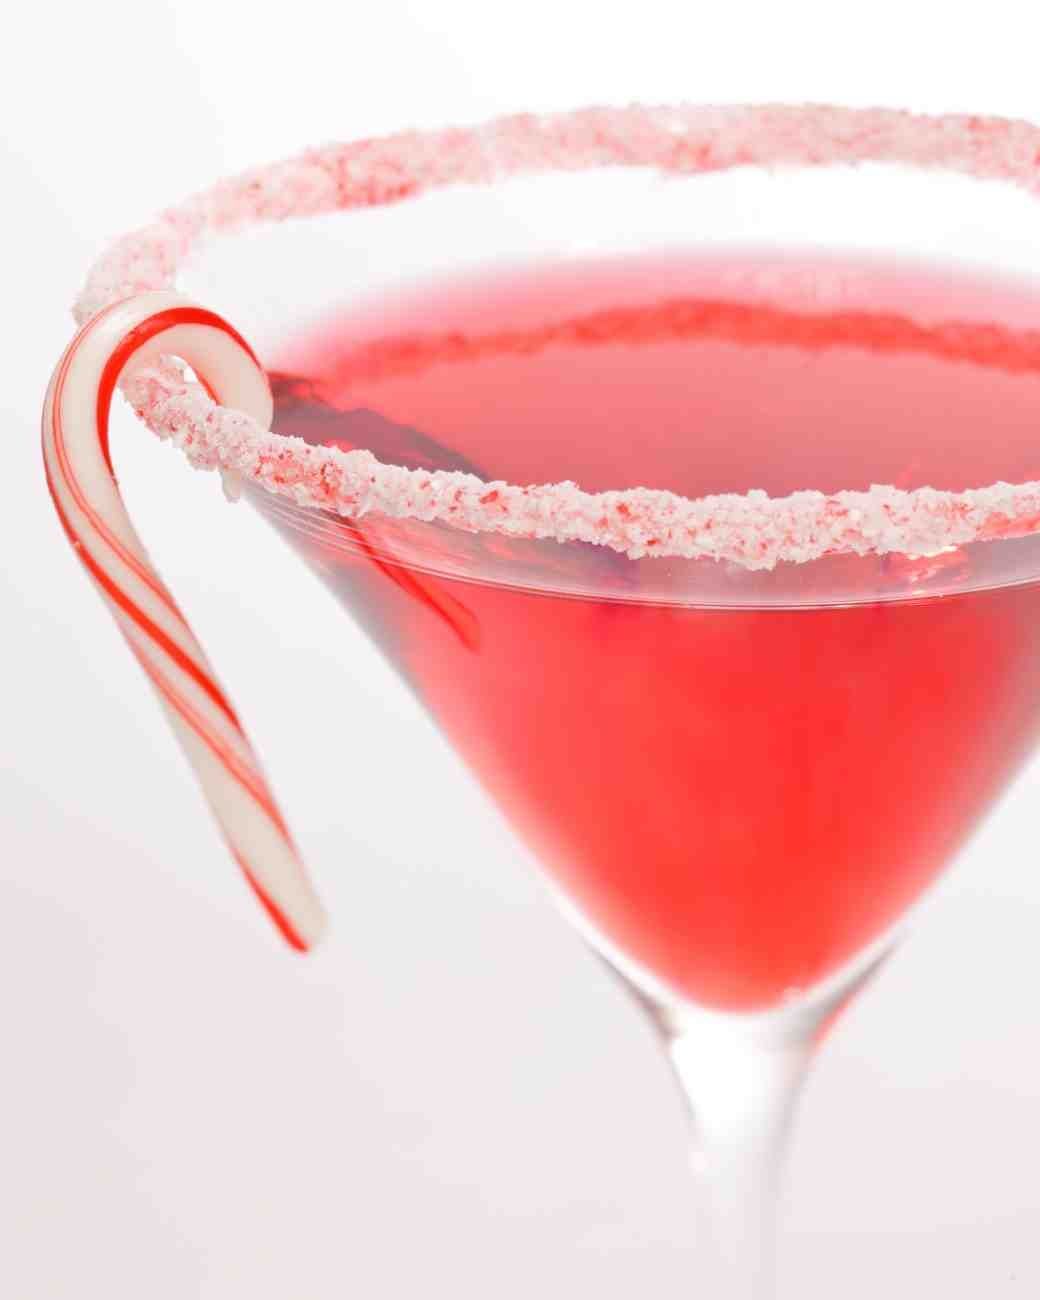 Candy Cane Cocktail Recipe Pictures Photos And Images For Facebook